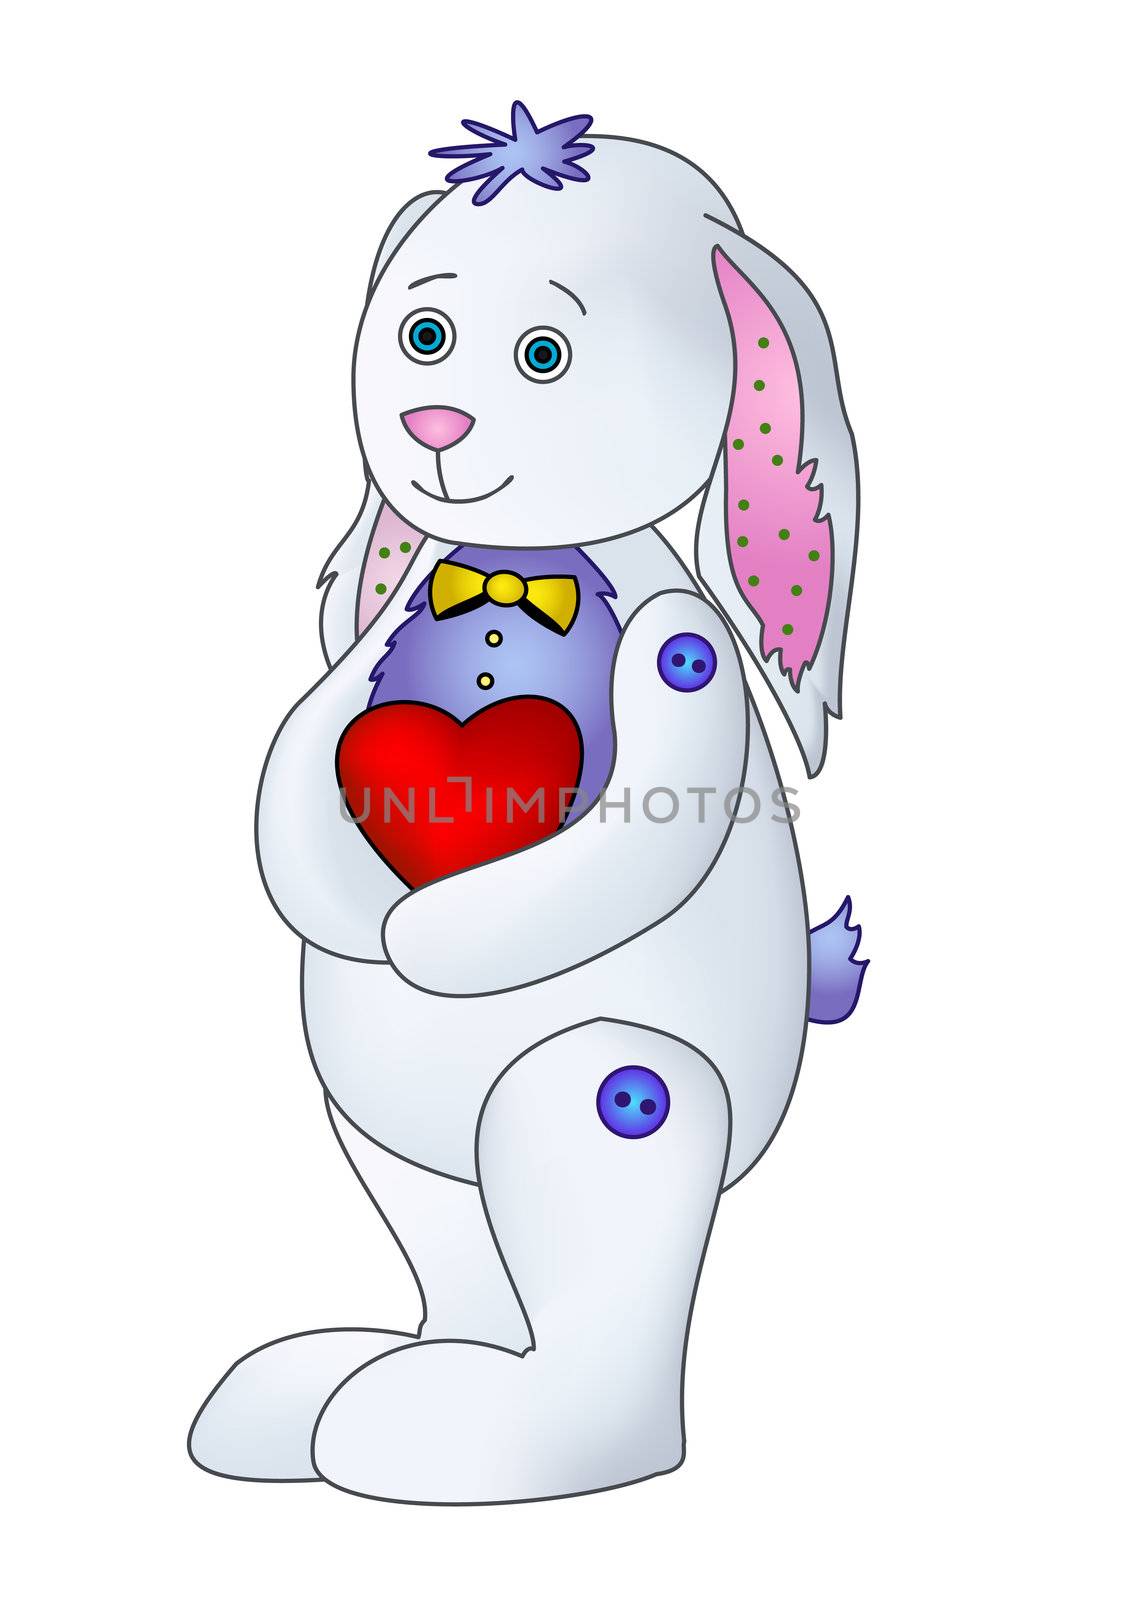 Rabbit with heart by alexcoolok